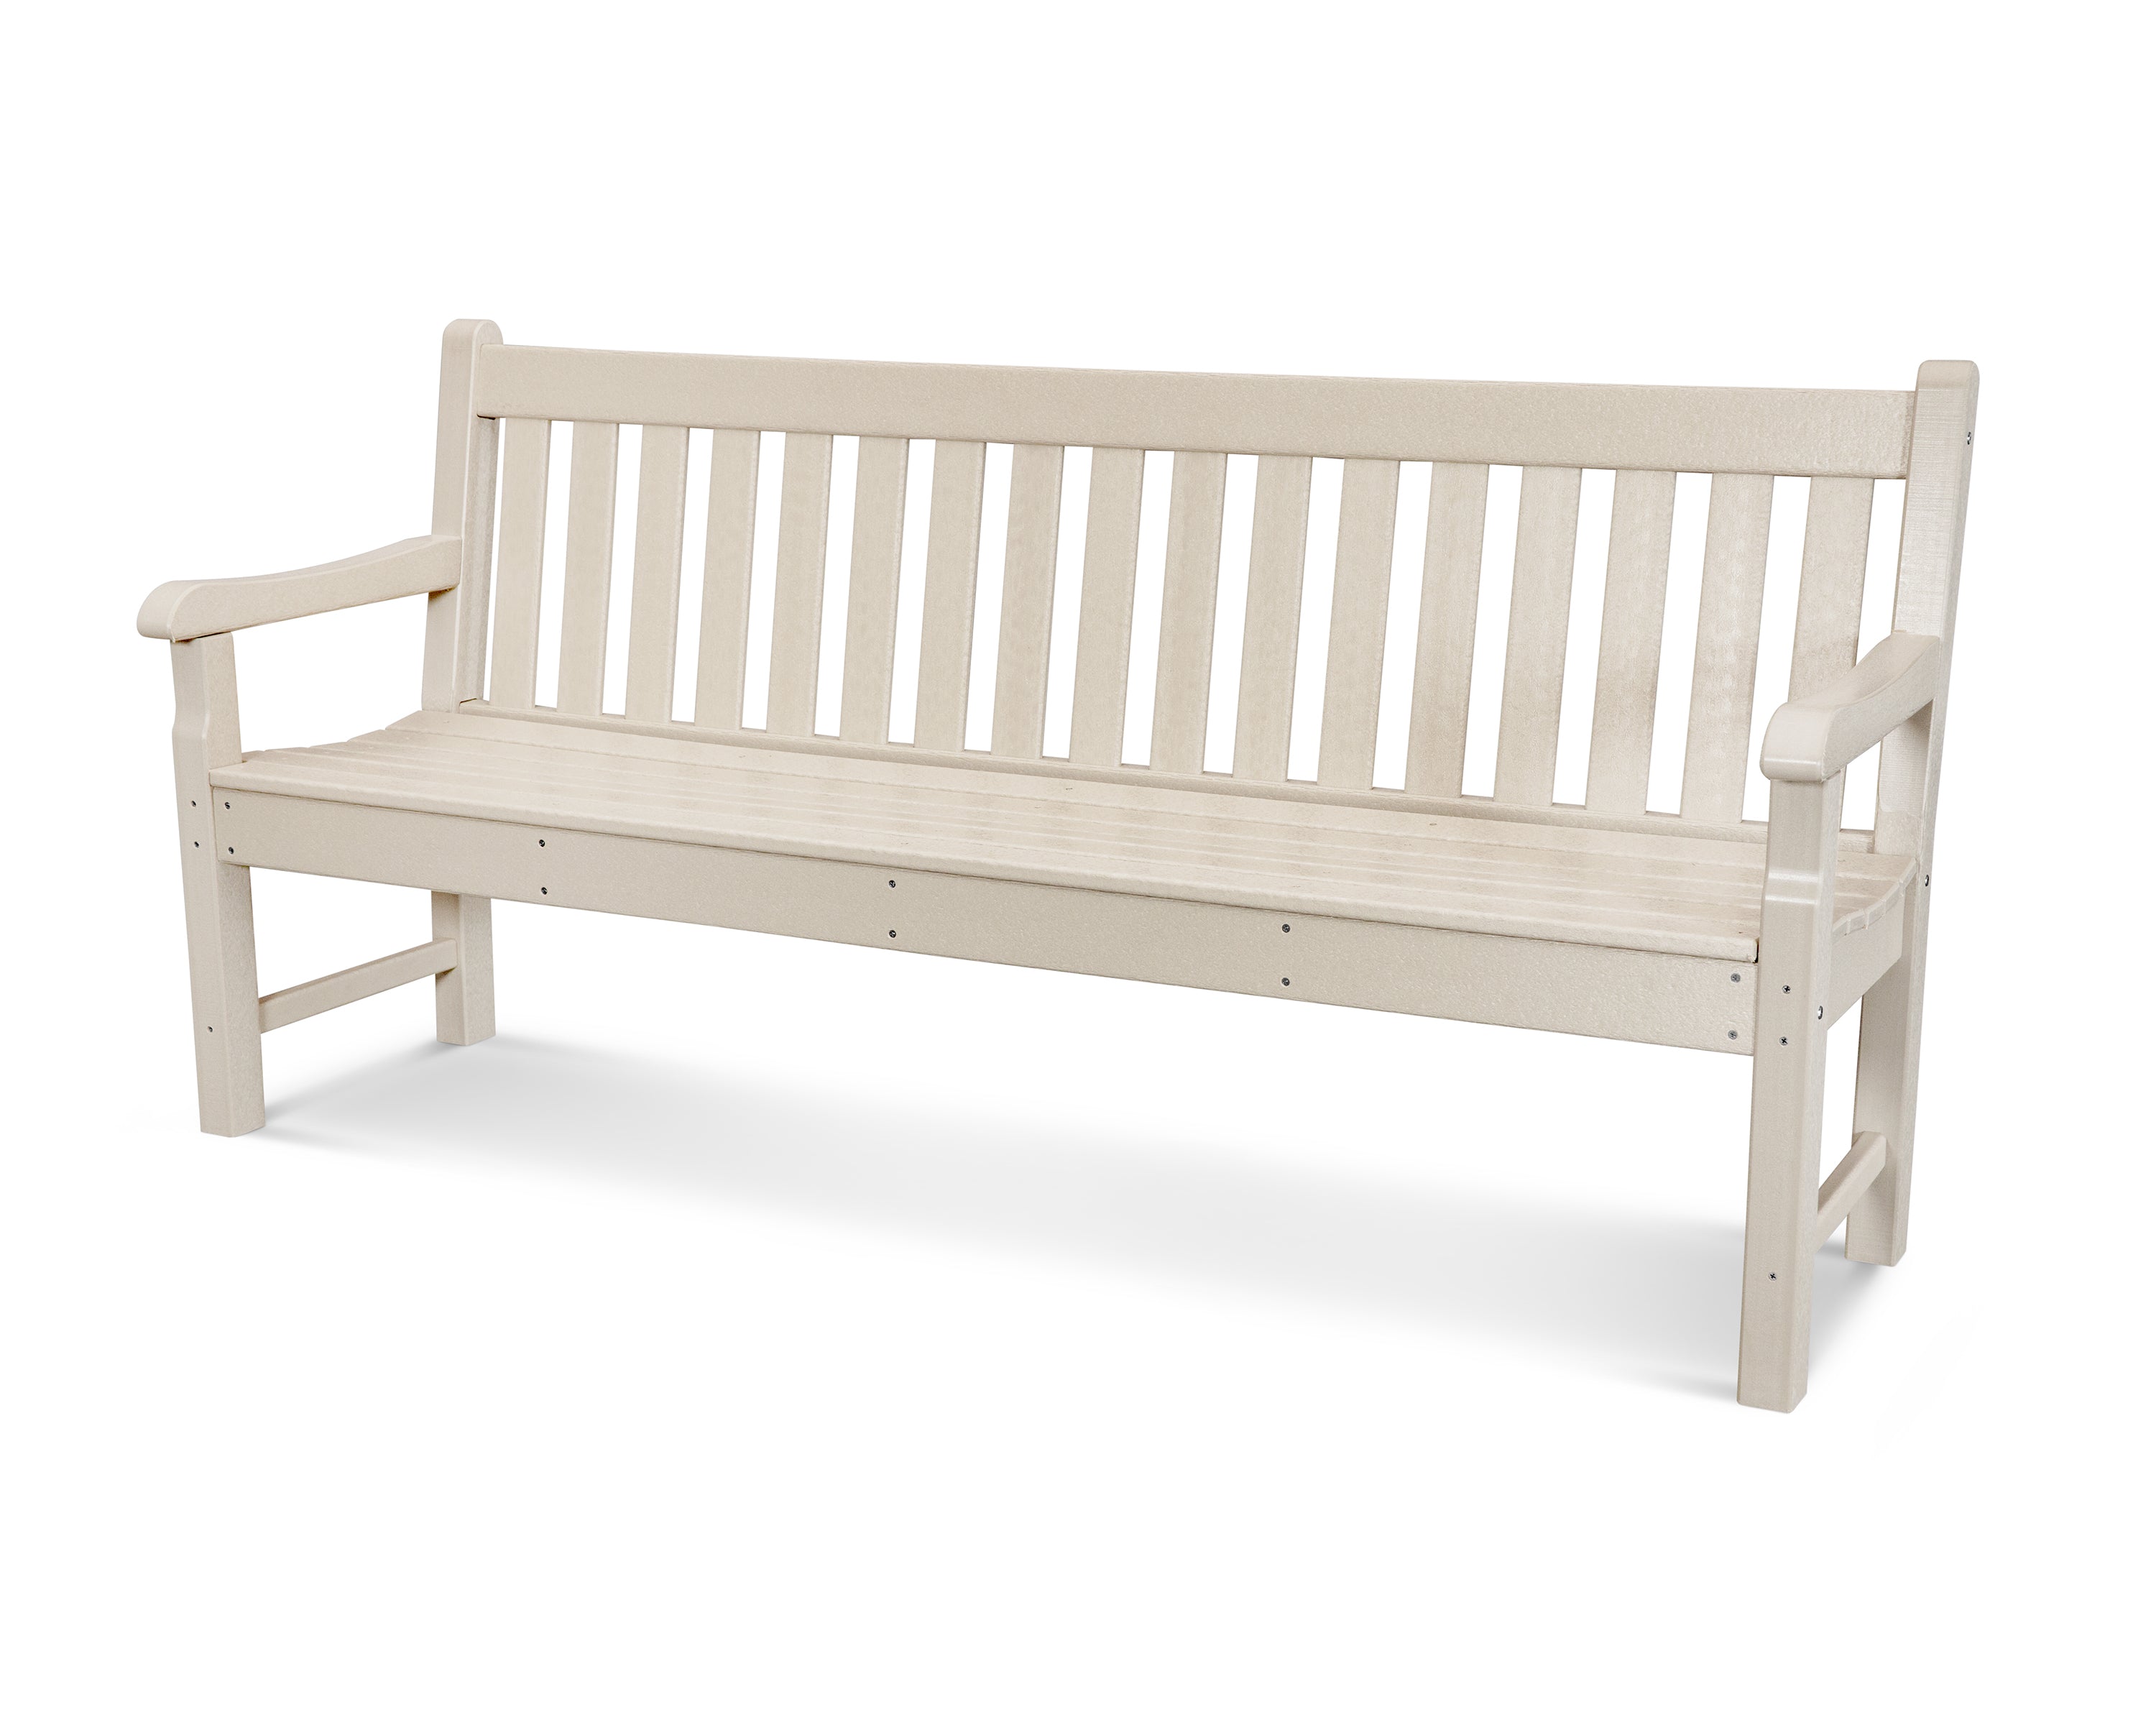 POLYWOOD® Rockford 72" Bench in Sand